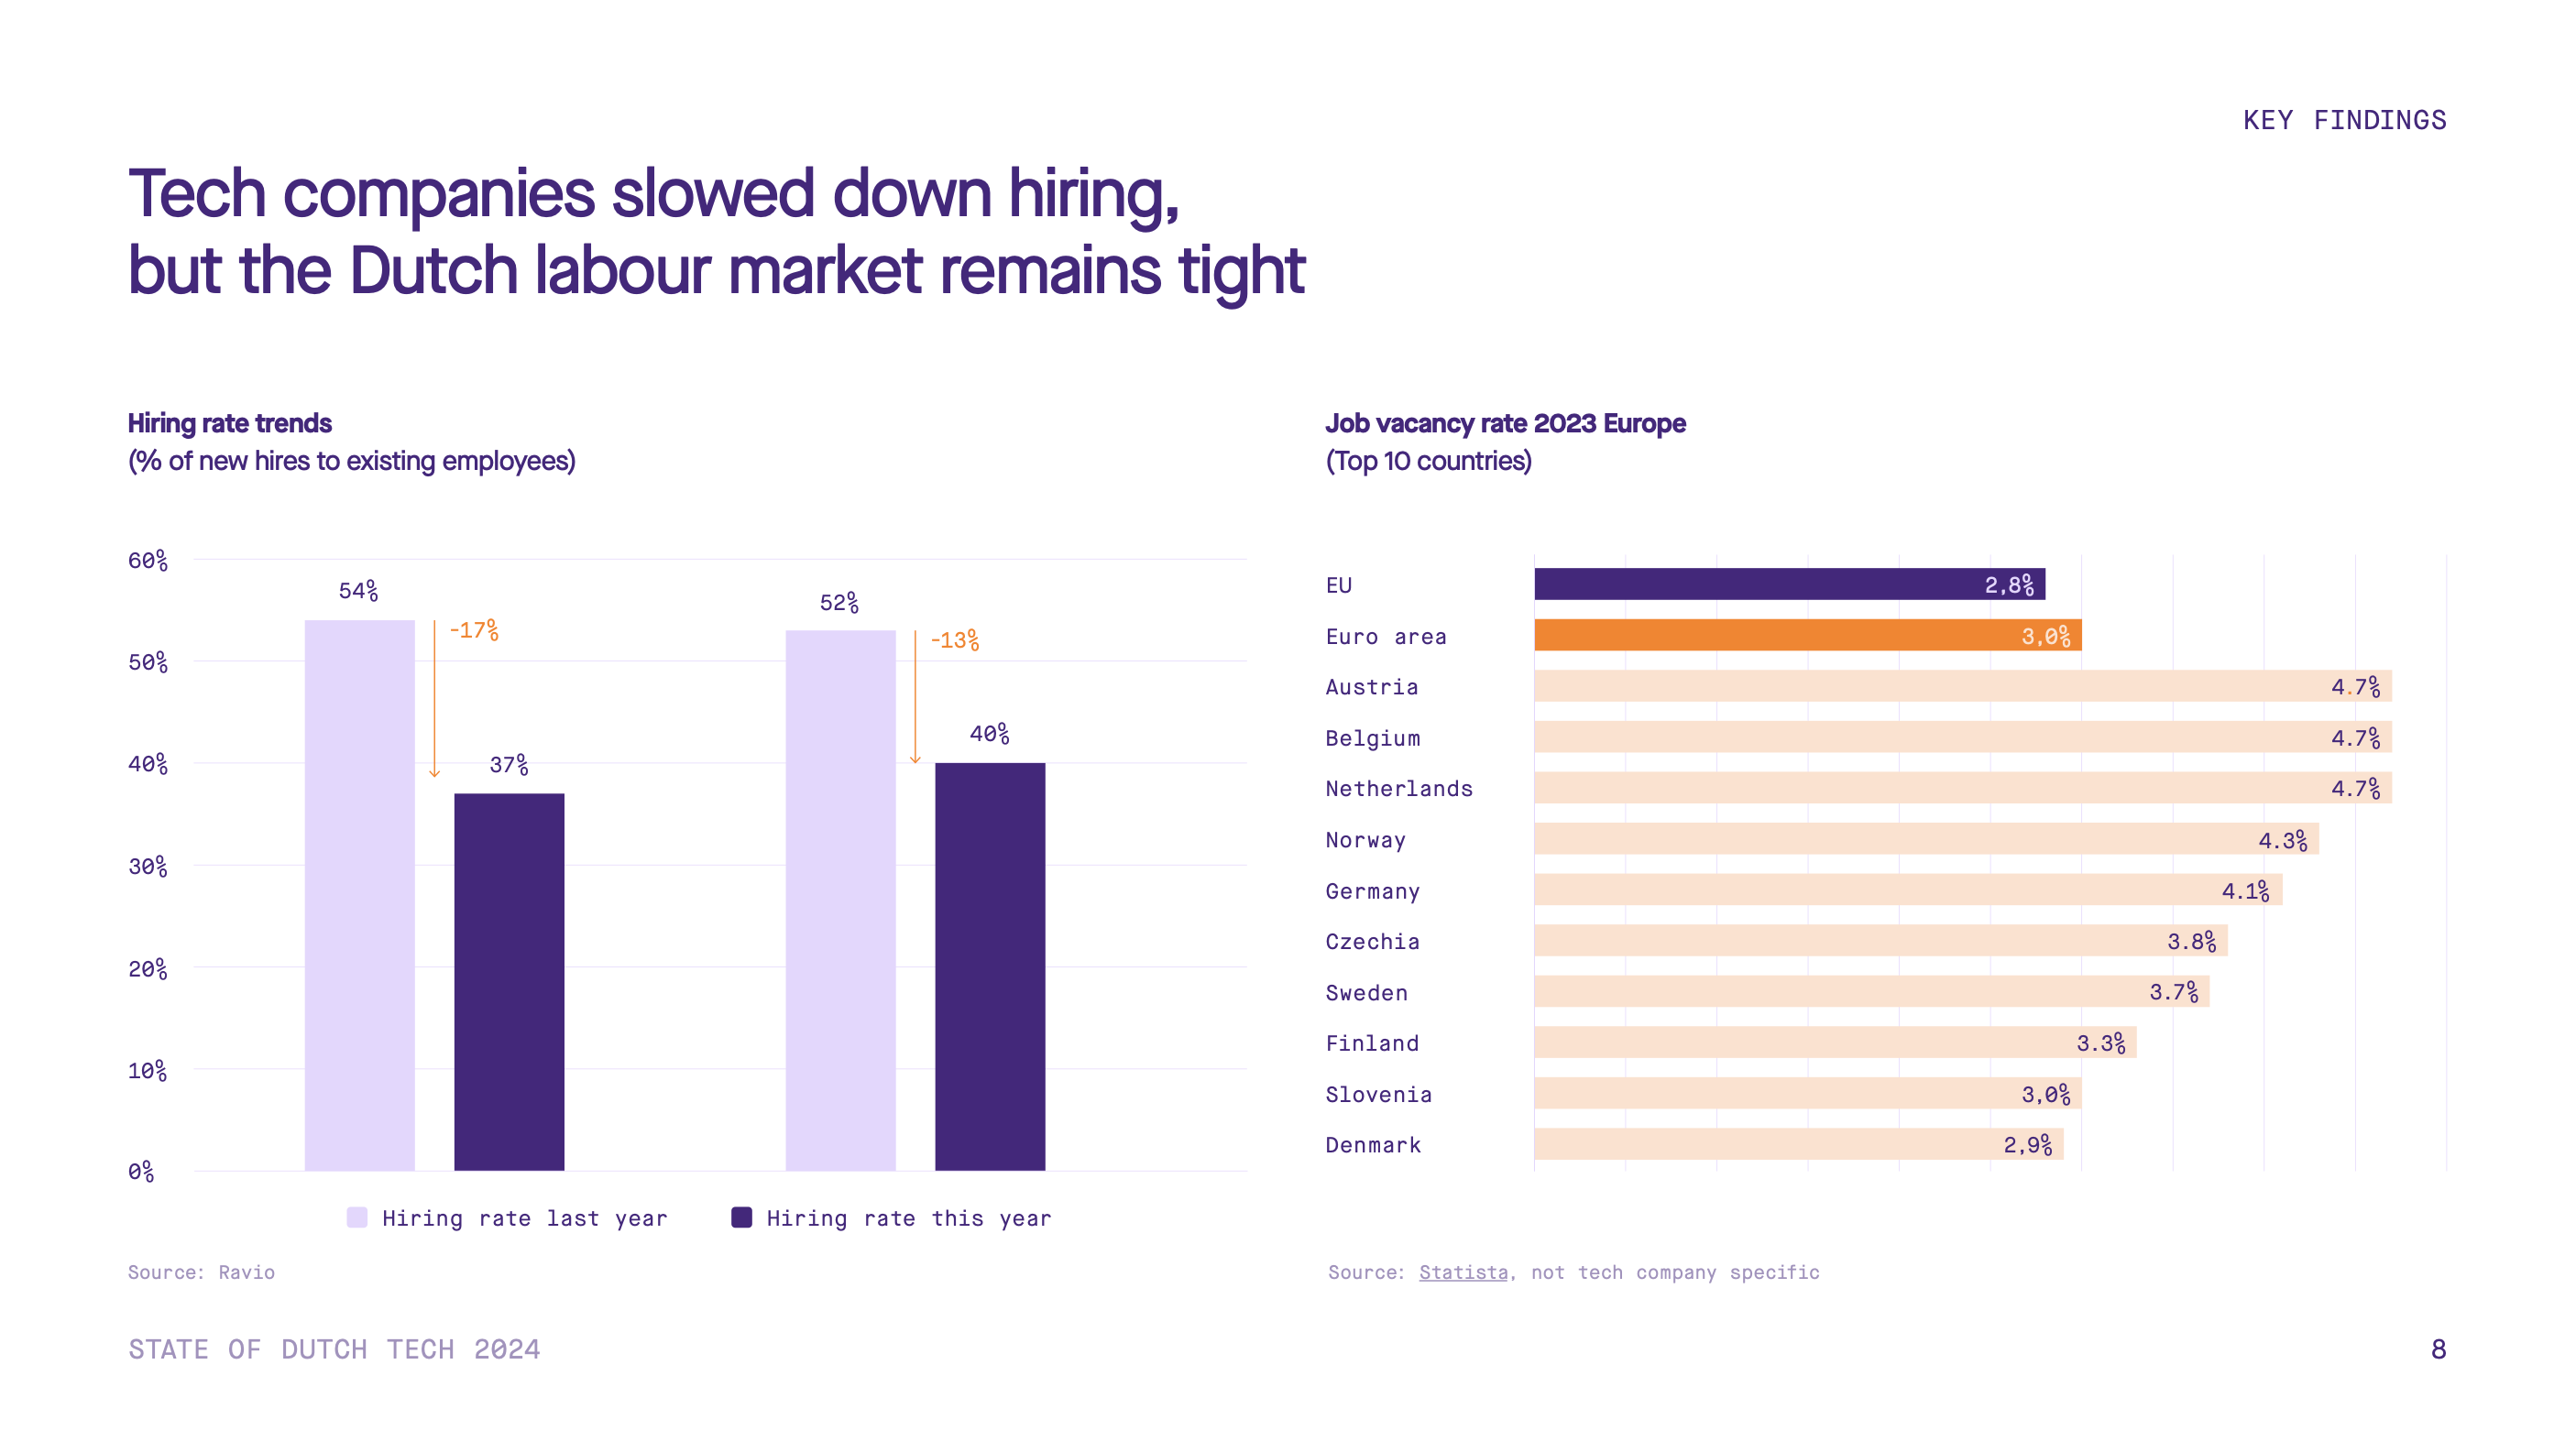 The State of Dutch Tech Report 2024 talent and Dutch labour market